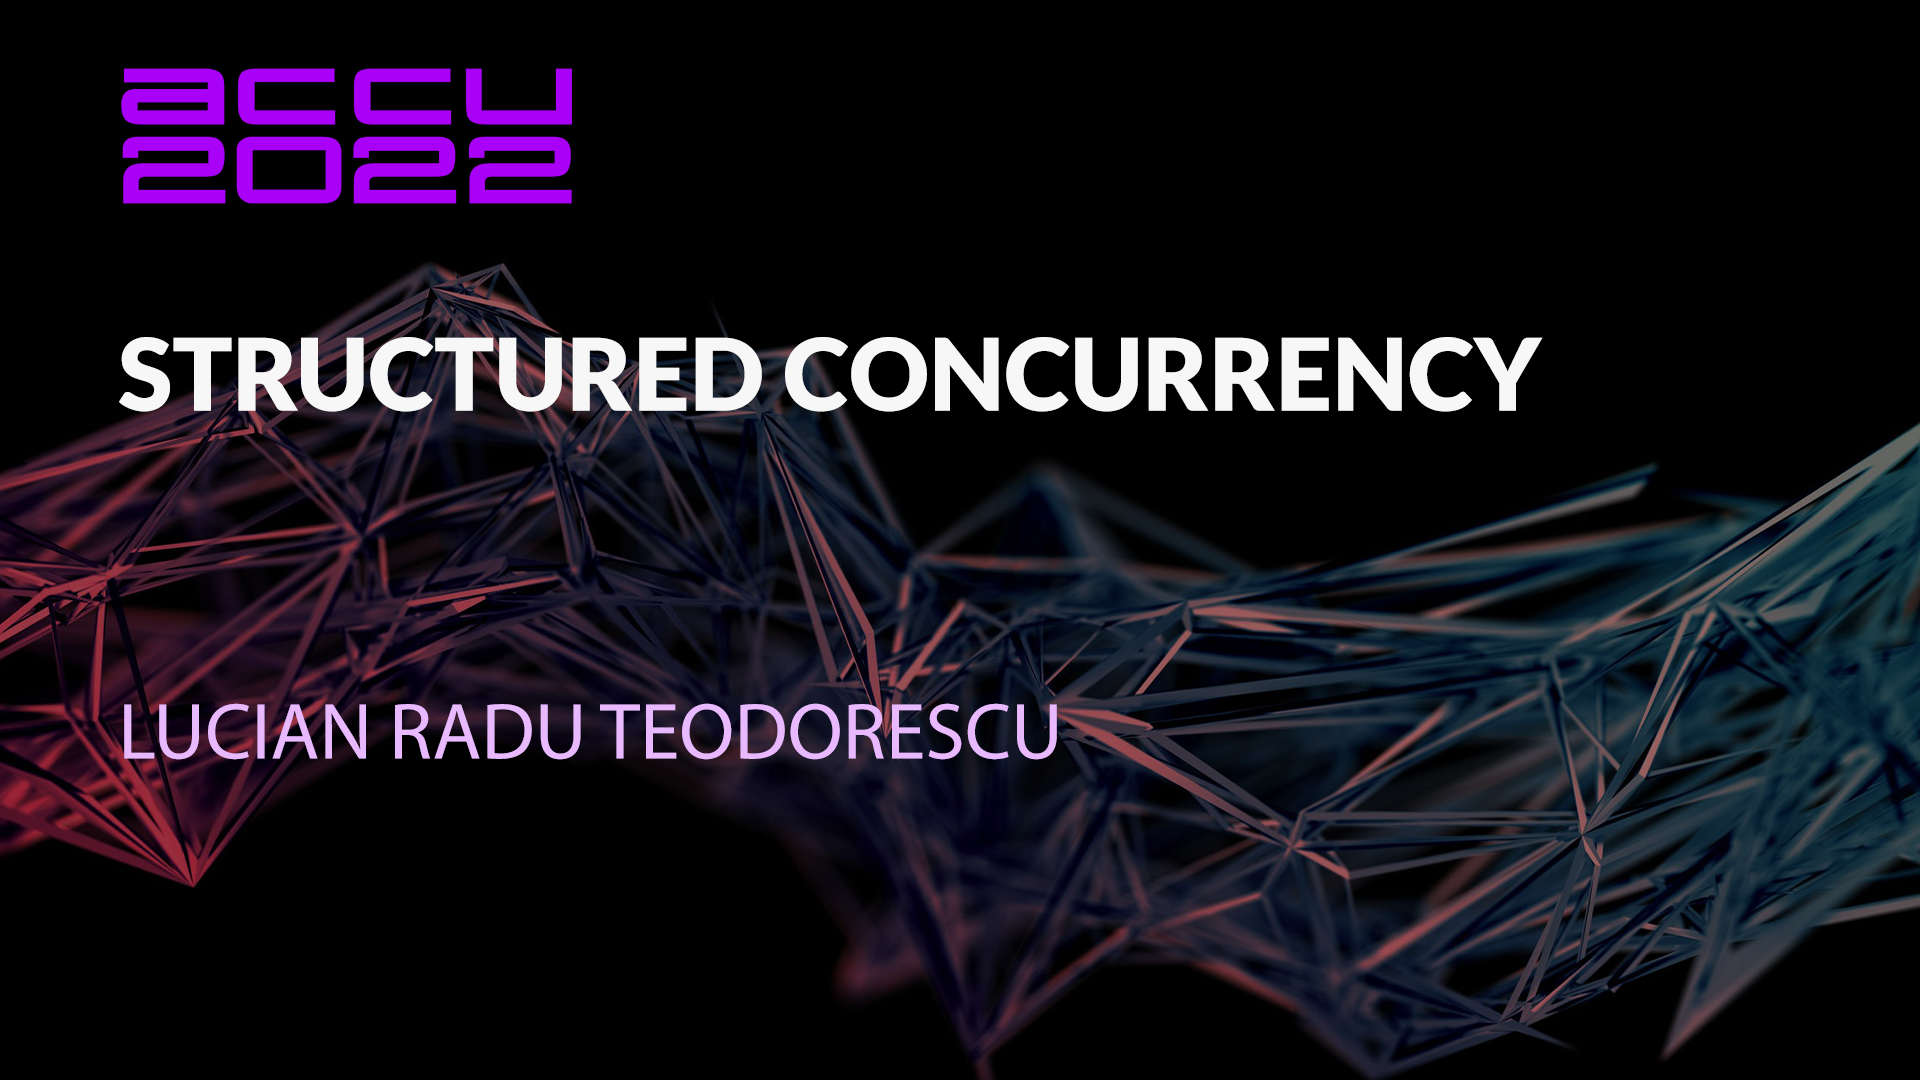 Structured Concurrency